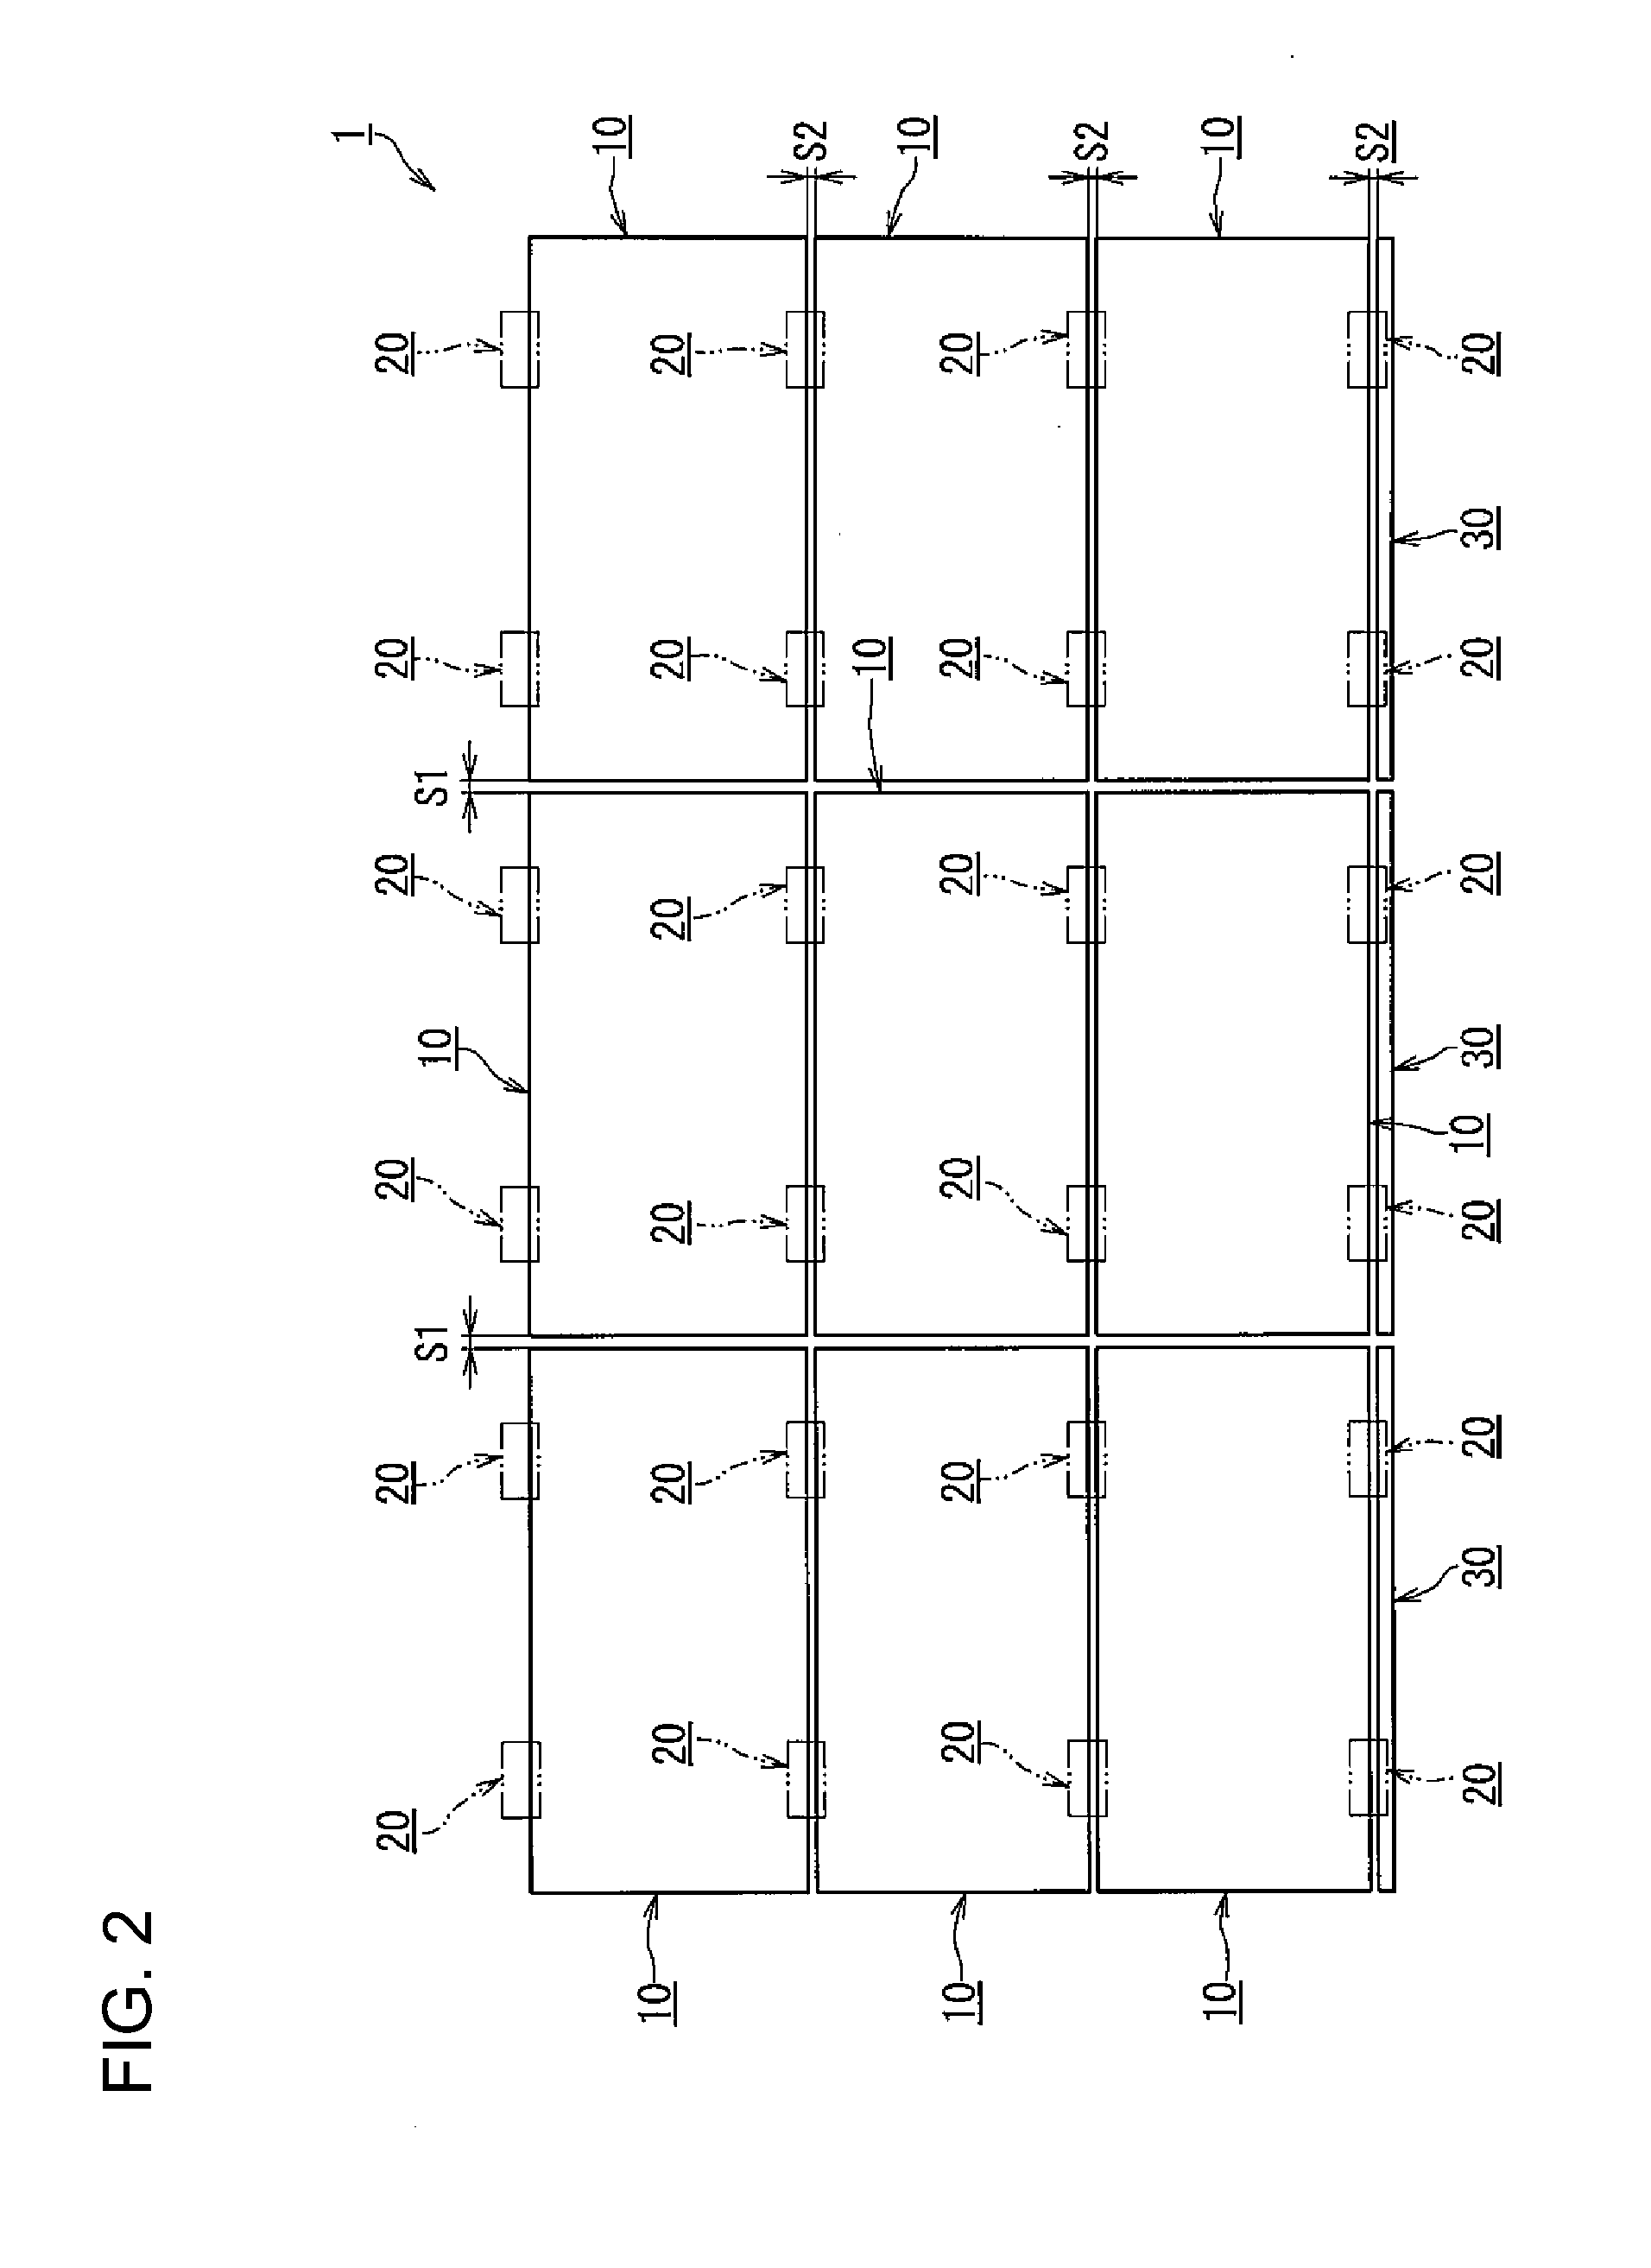 Structure for securing solar cell modules and frame and securing member for solar cell modules